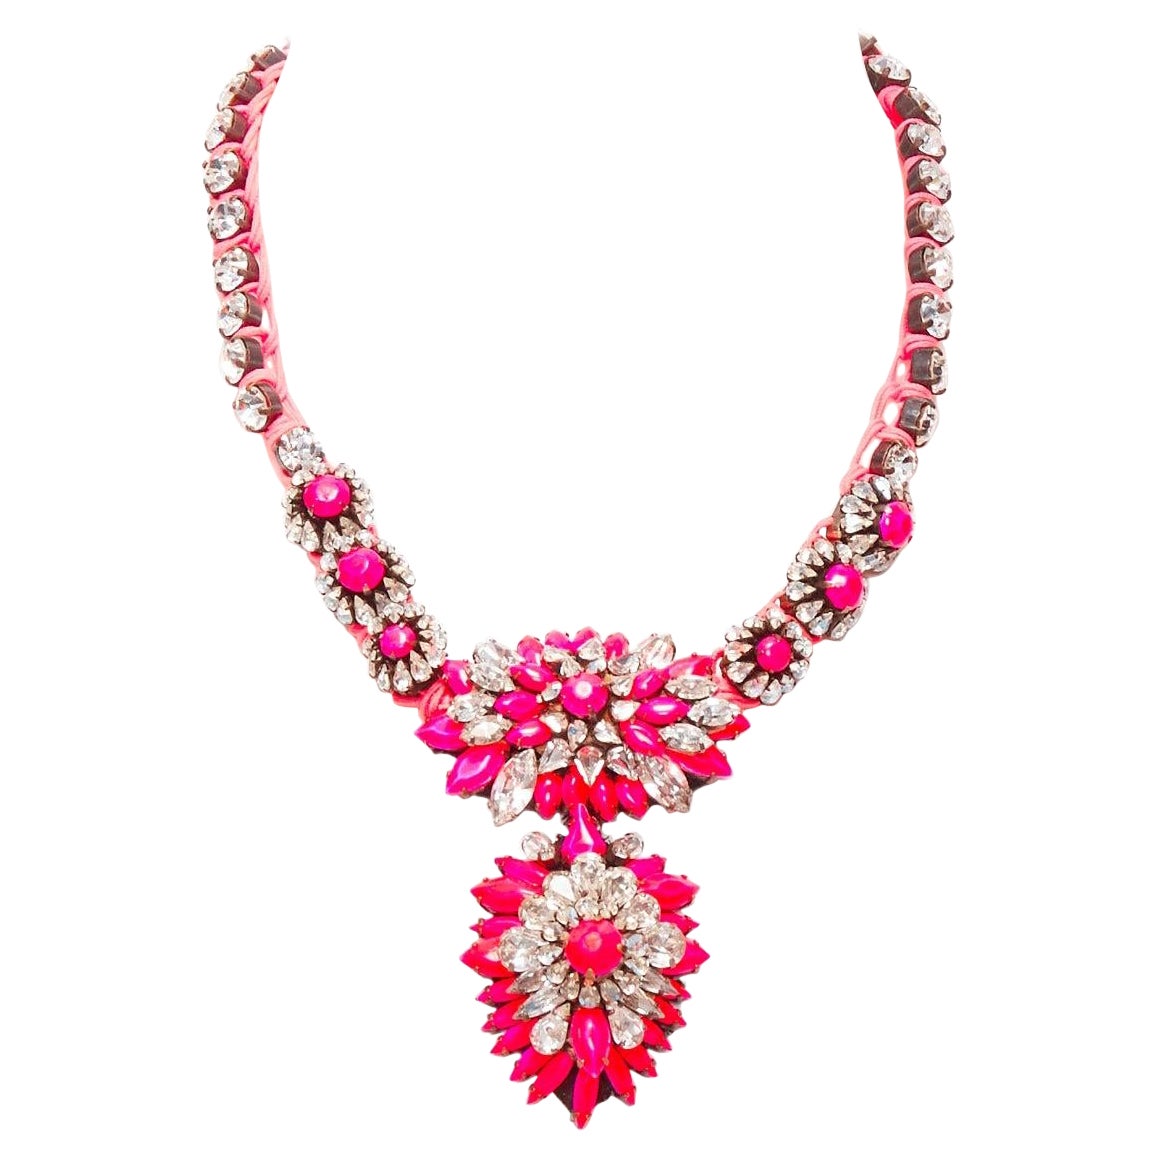 SHOUROUK neon pink clear crystal charm rope chain short necklace For Sale